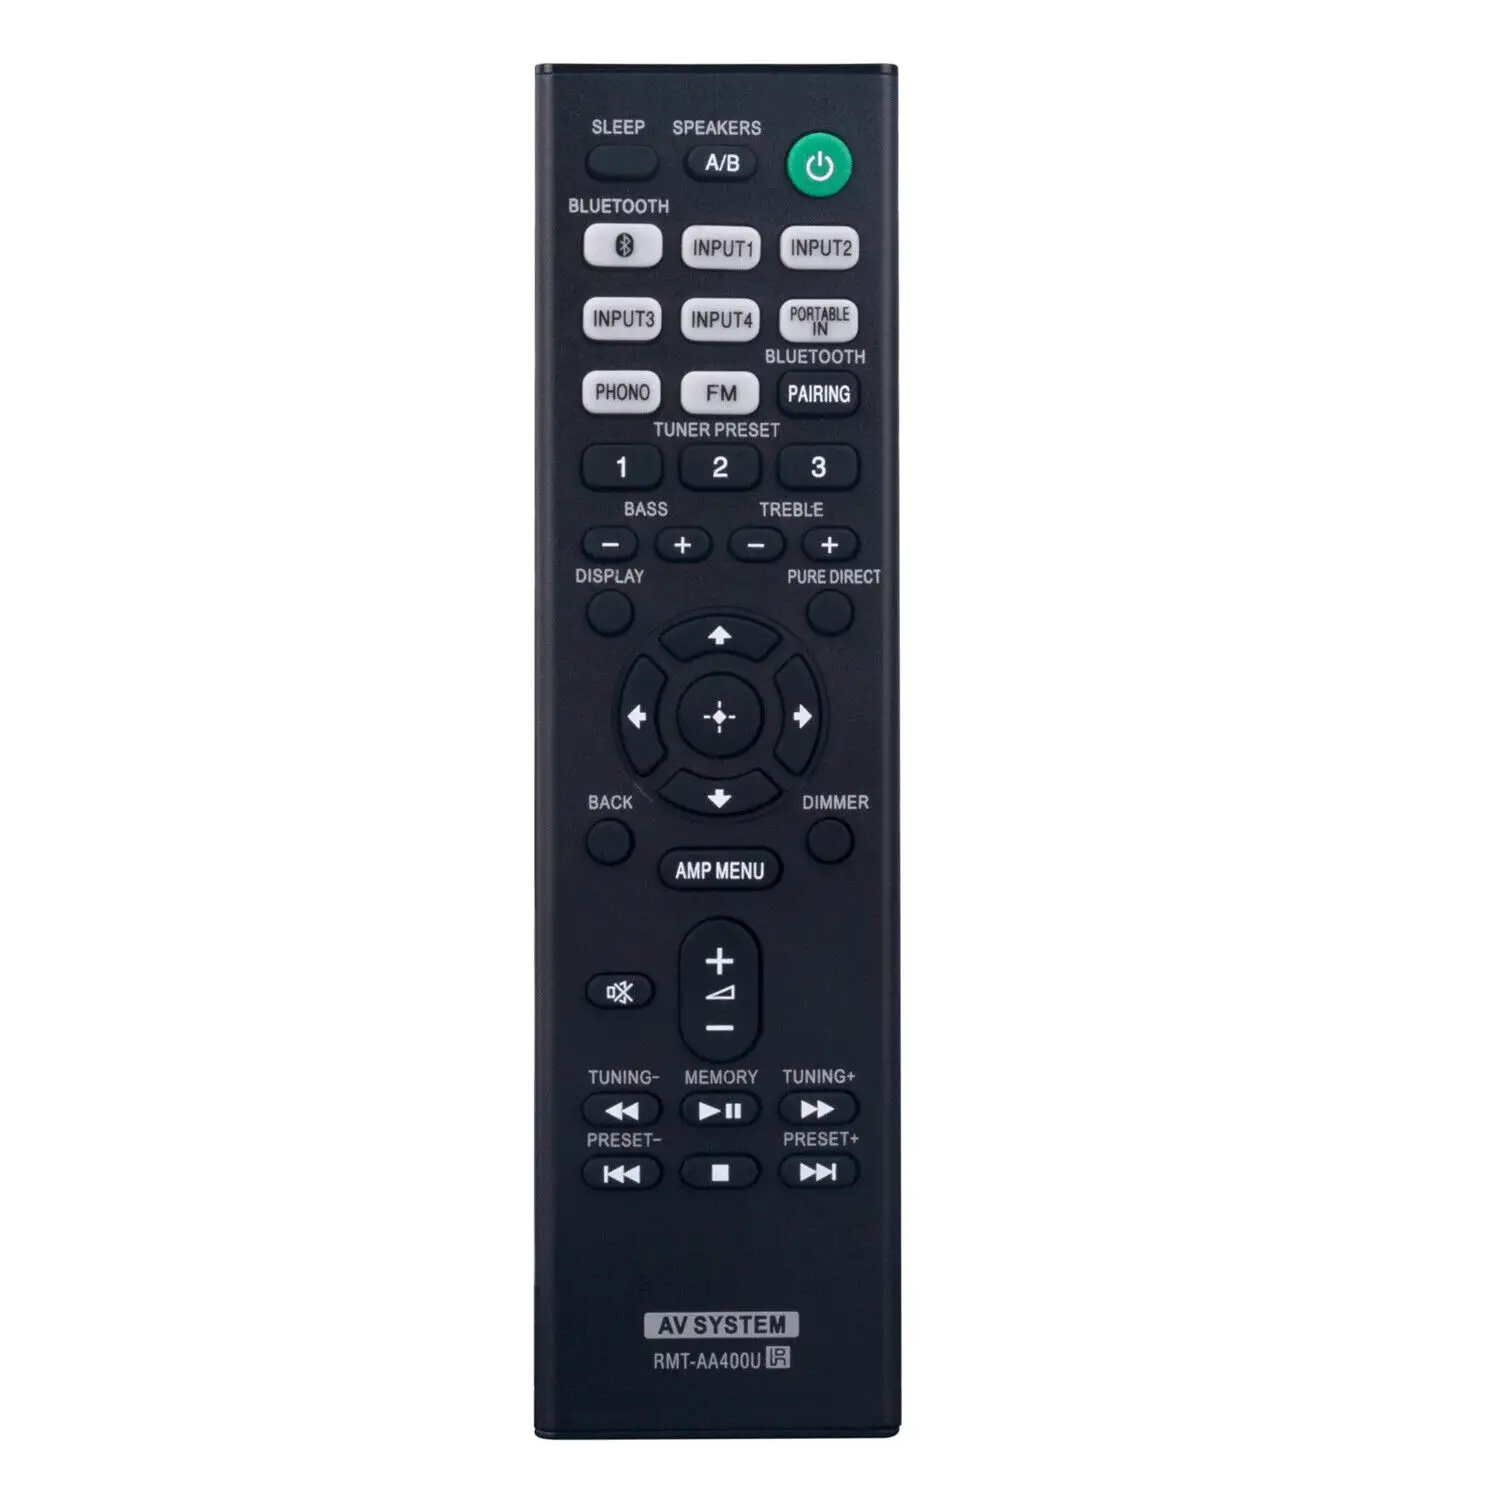 RMT-AA400U Remote Fit for Sony Stereo Receiver STR-DH190 STRDH190 RMTAA400U 1-493-369-11 RT149336911